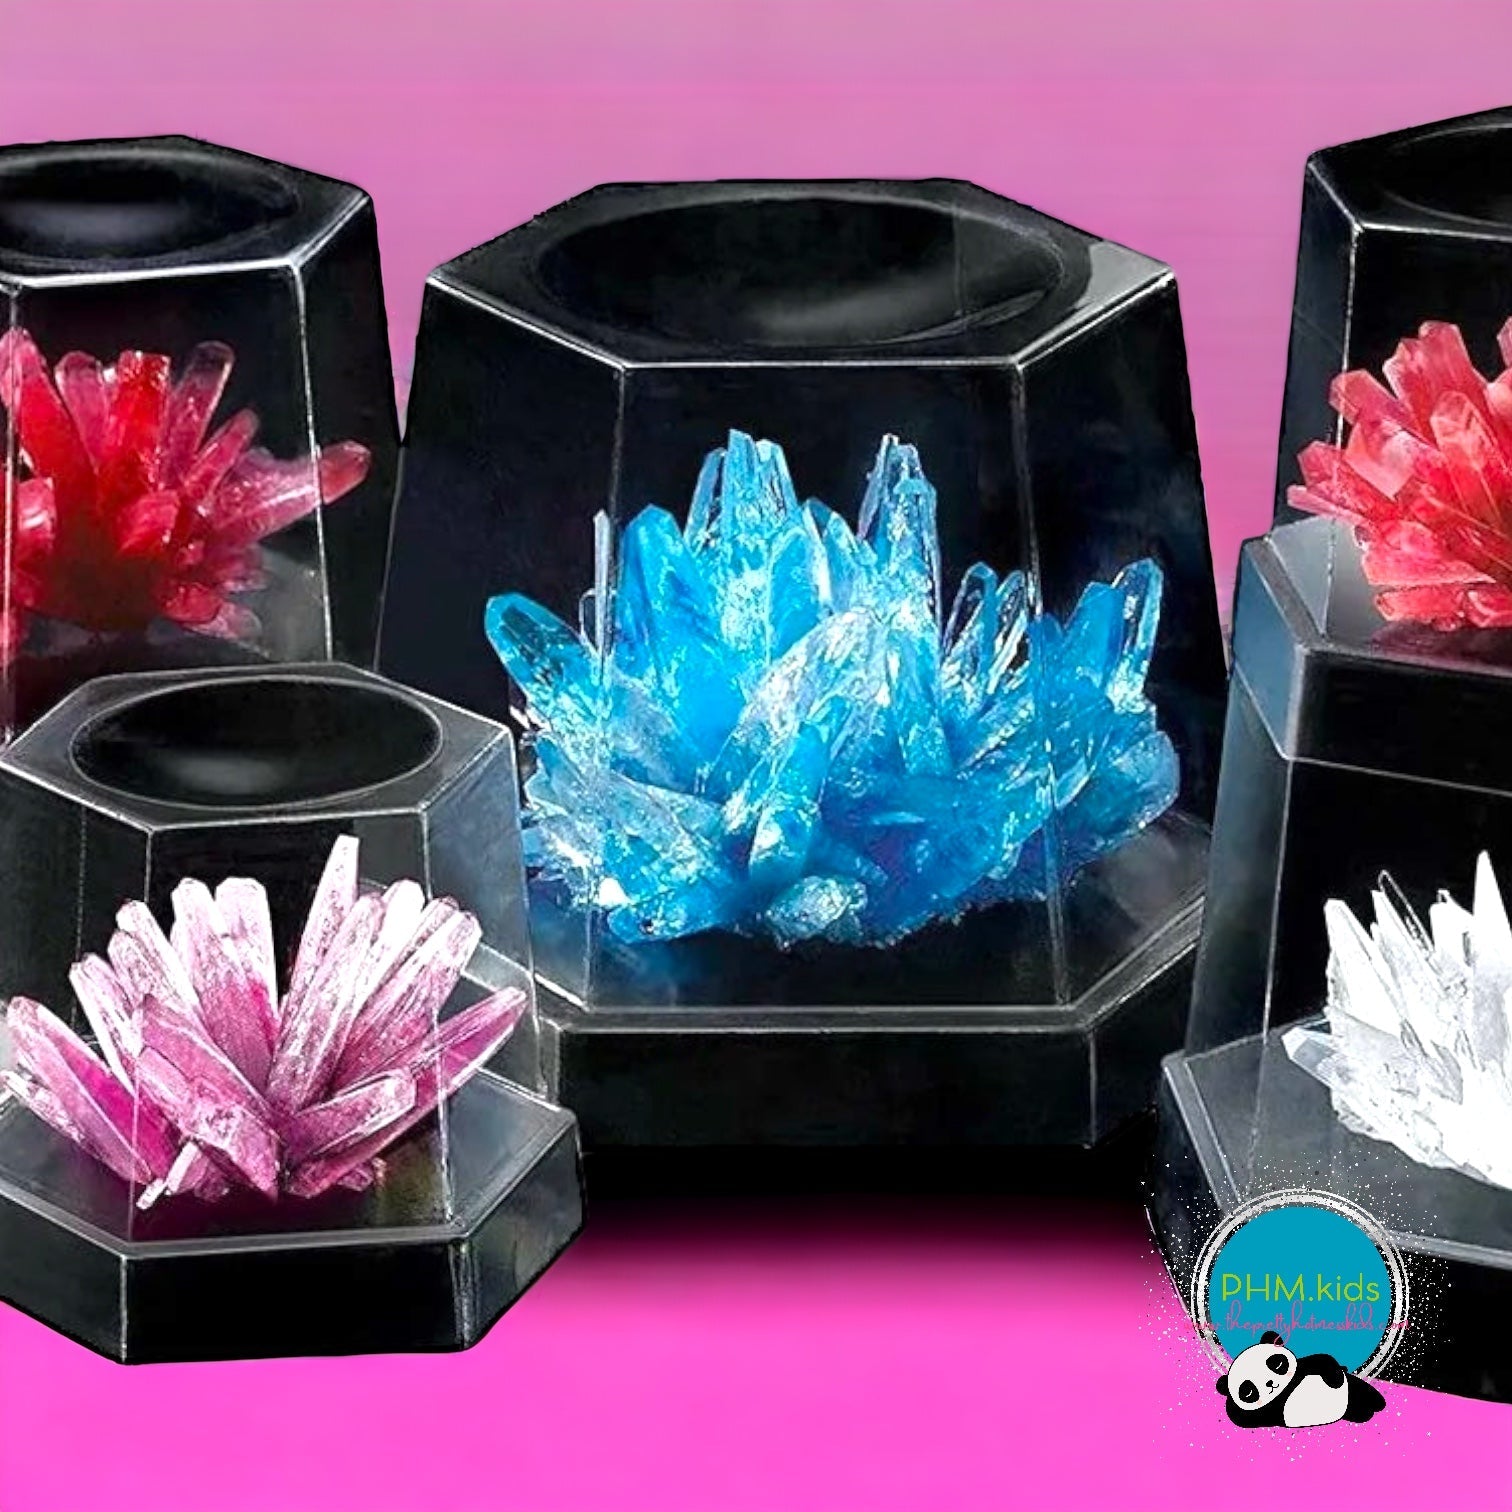 Crystal Growing Experiment